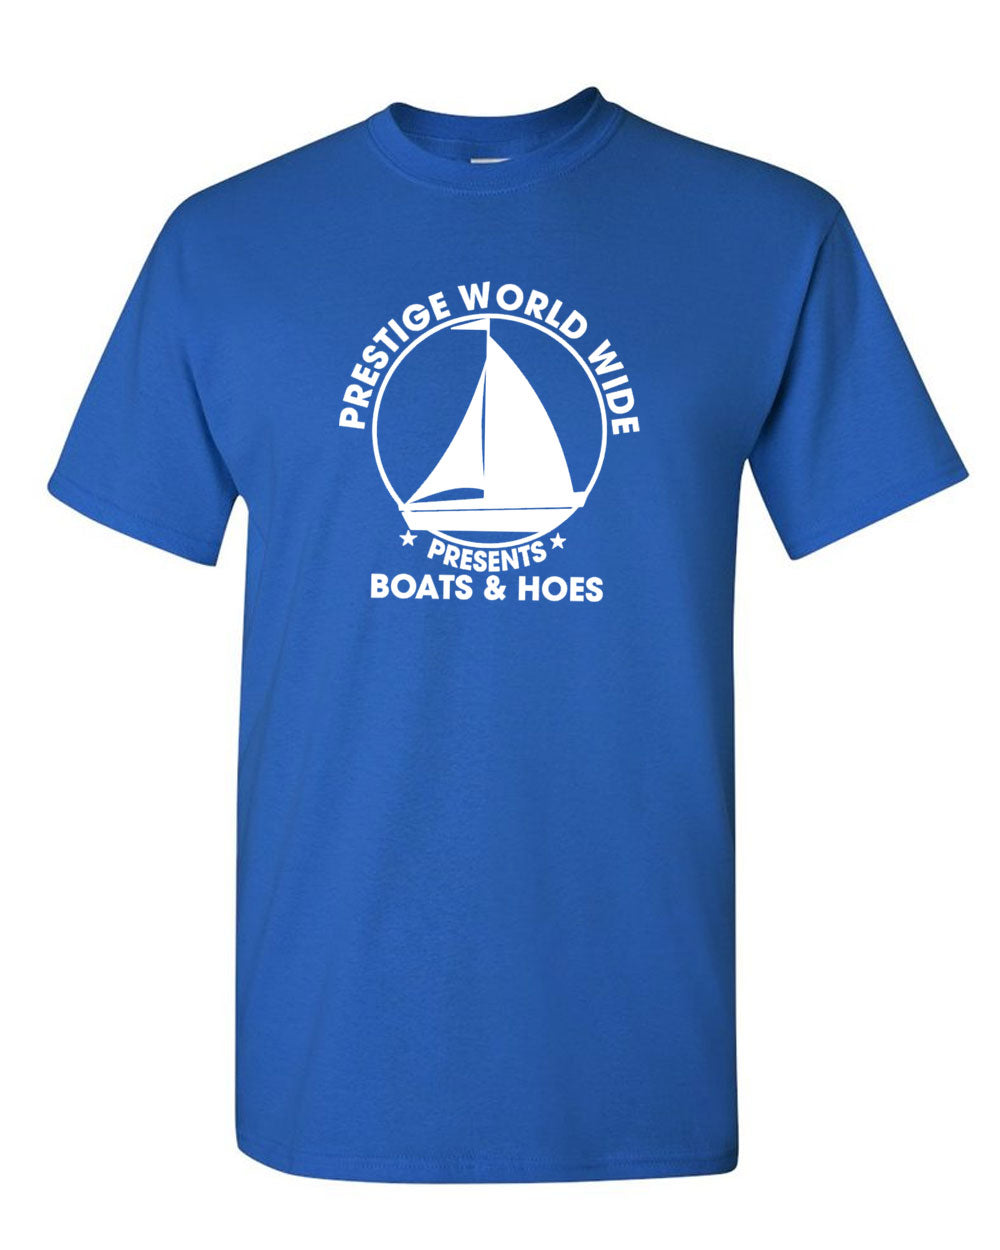 Prestige Worldwide T-Shirt Funny Boats and H*Es Graphic Humor Tee, 3X / White